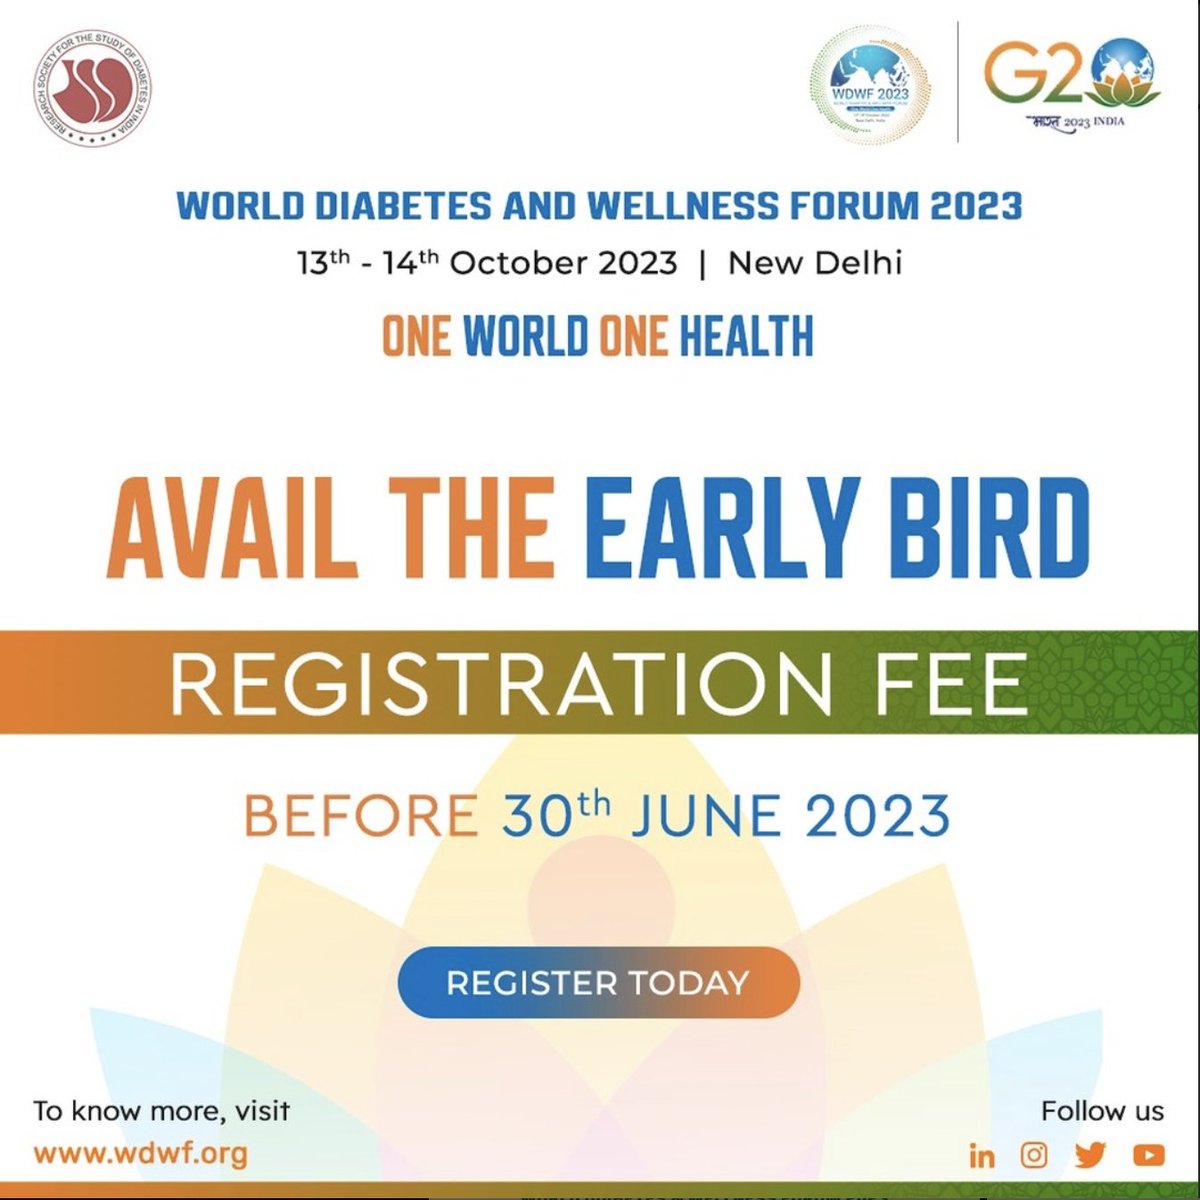 📢 HAVE YOU REGISTERED FOR WORLD DIABETES AND WELLNESS FORUM 2023?

🔗Visit the website to register online at wdwf.org

#HealthForAll #diabetesawareness #diabetescommunity #healthandwellness #wellnessprograms #g20india #G20 #healthylifestyle